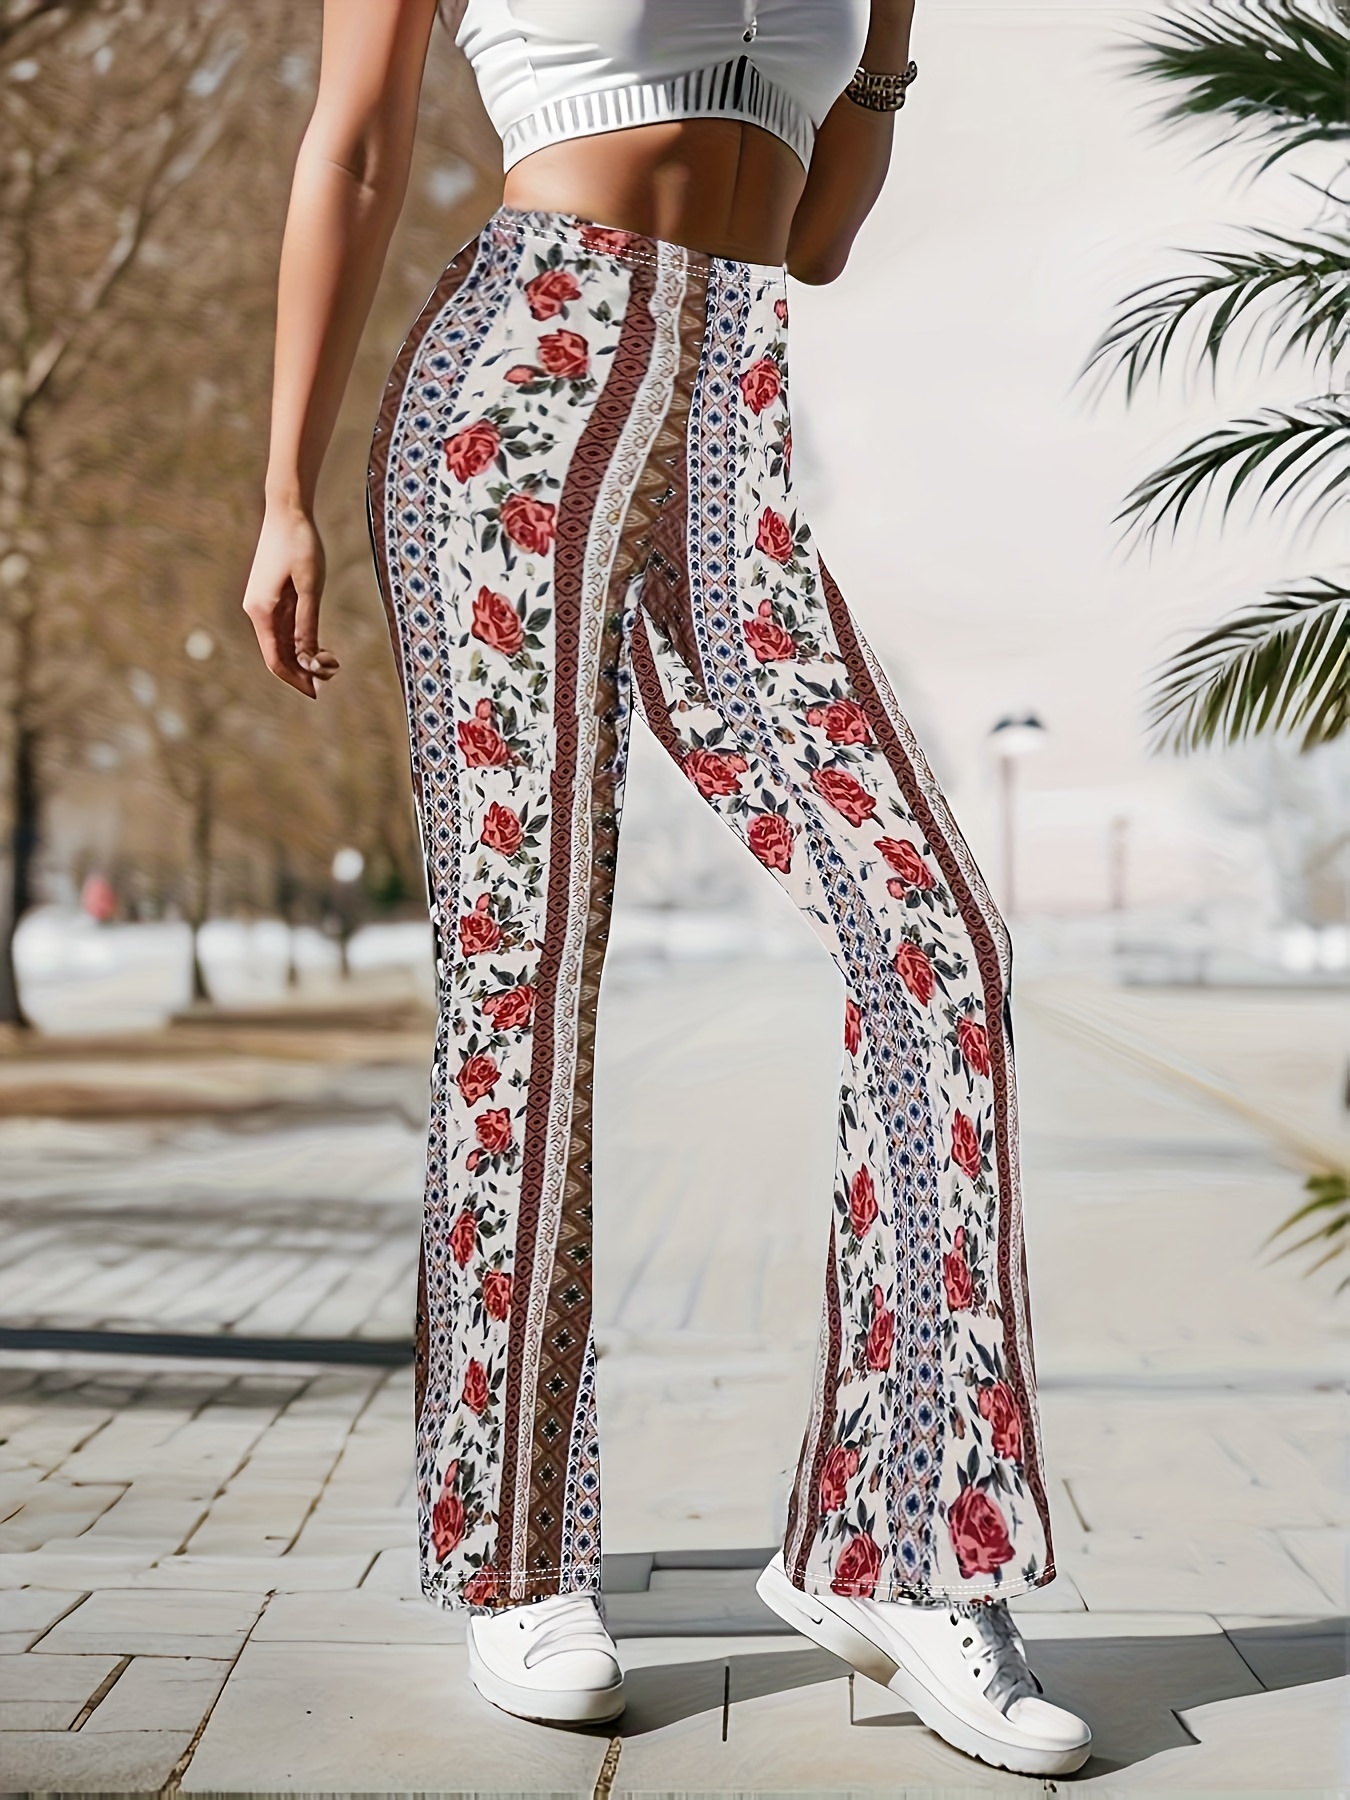 Trousers 2022 Women Floral Printed Boho